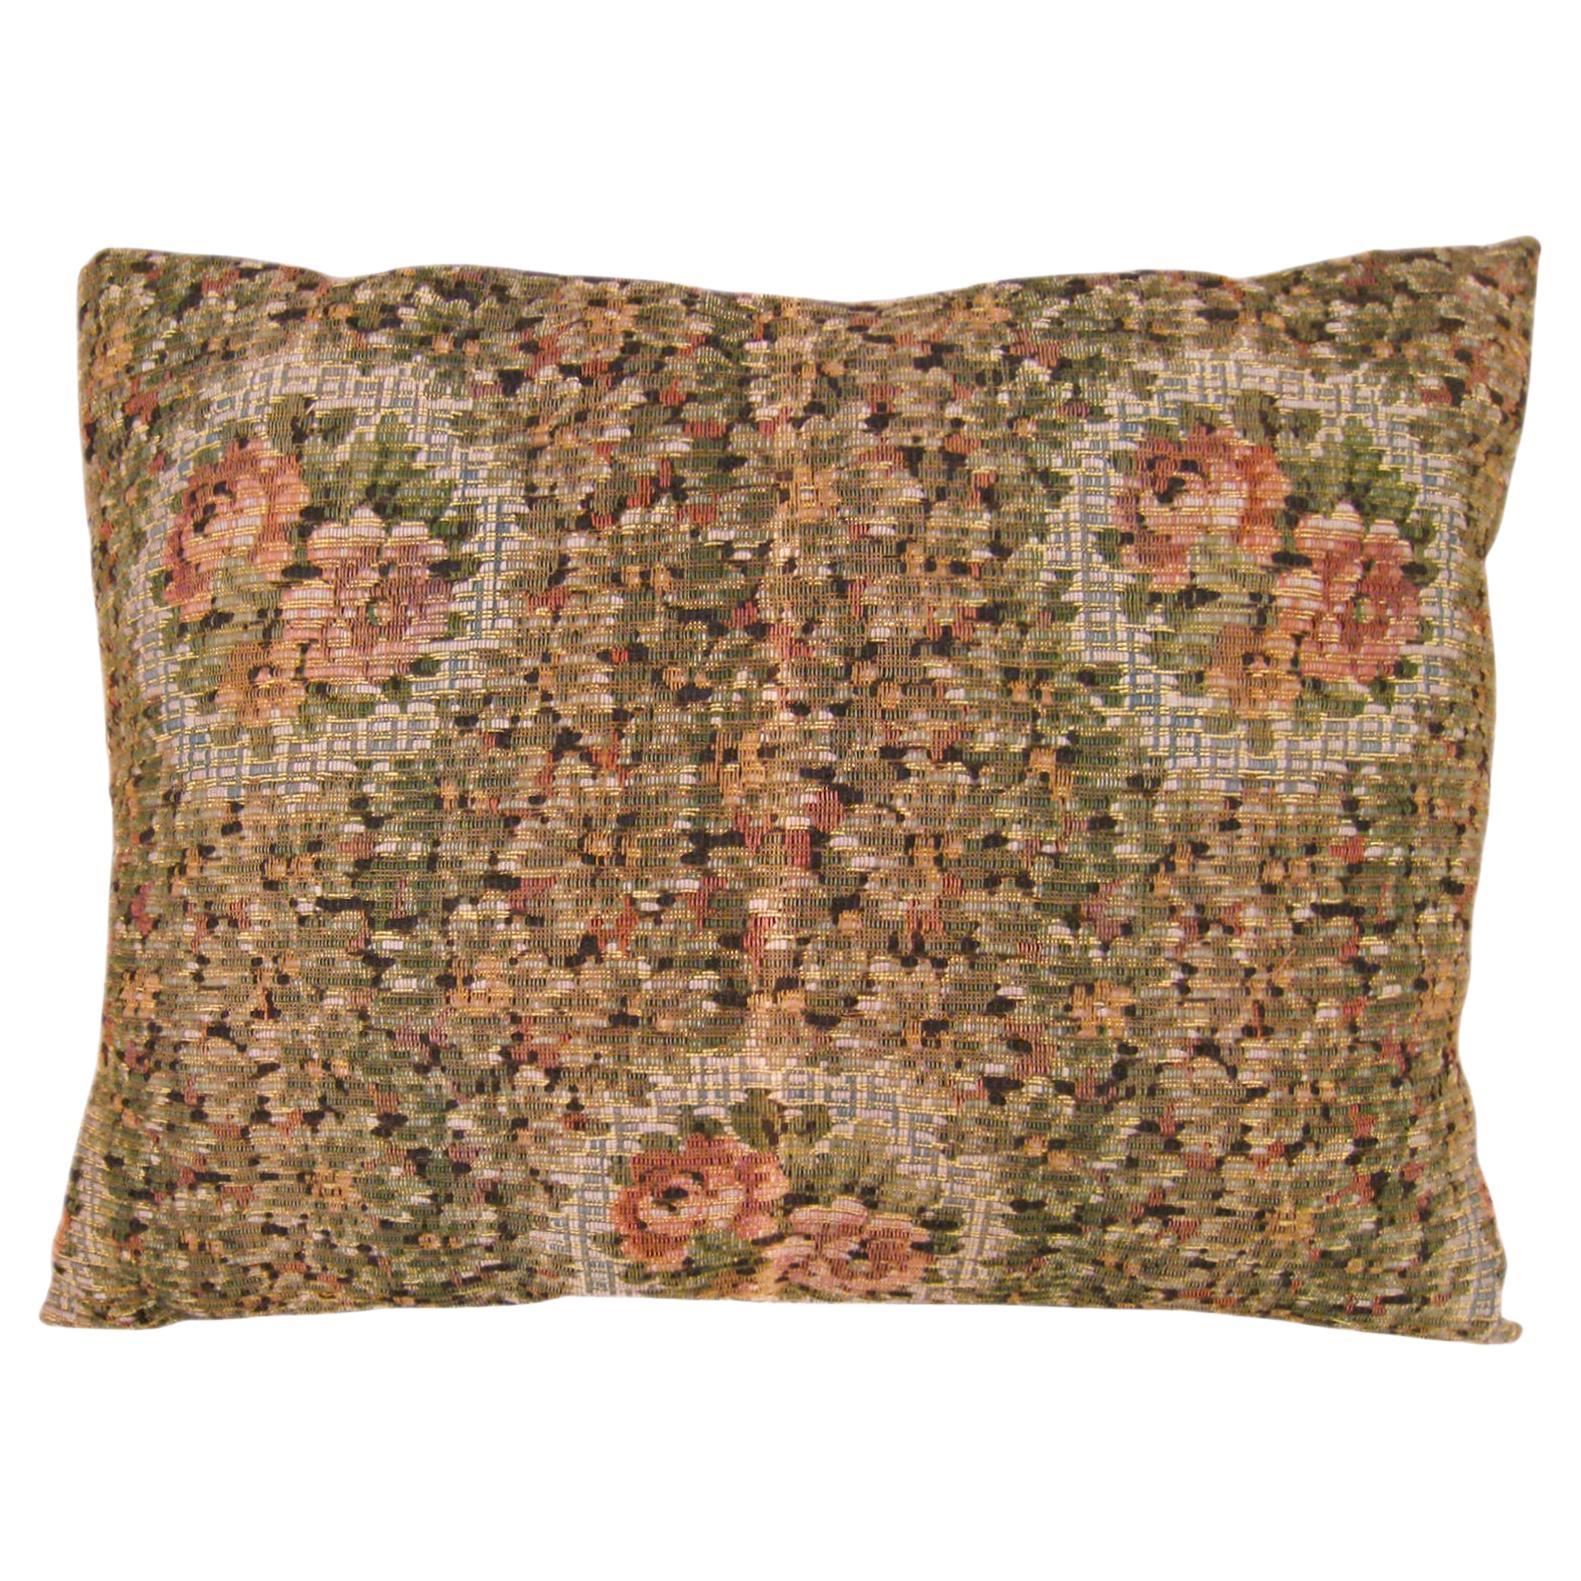 Decorative Antique Jacquard Tapestry Pillow with Floral Elments Allover For Sale